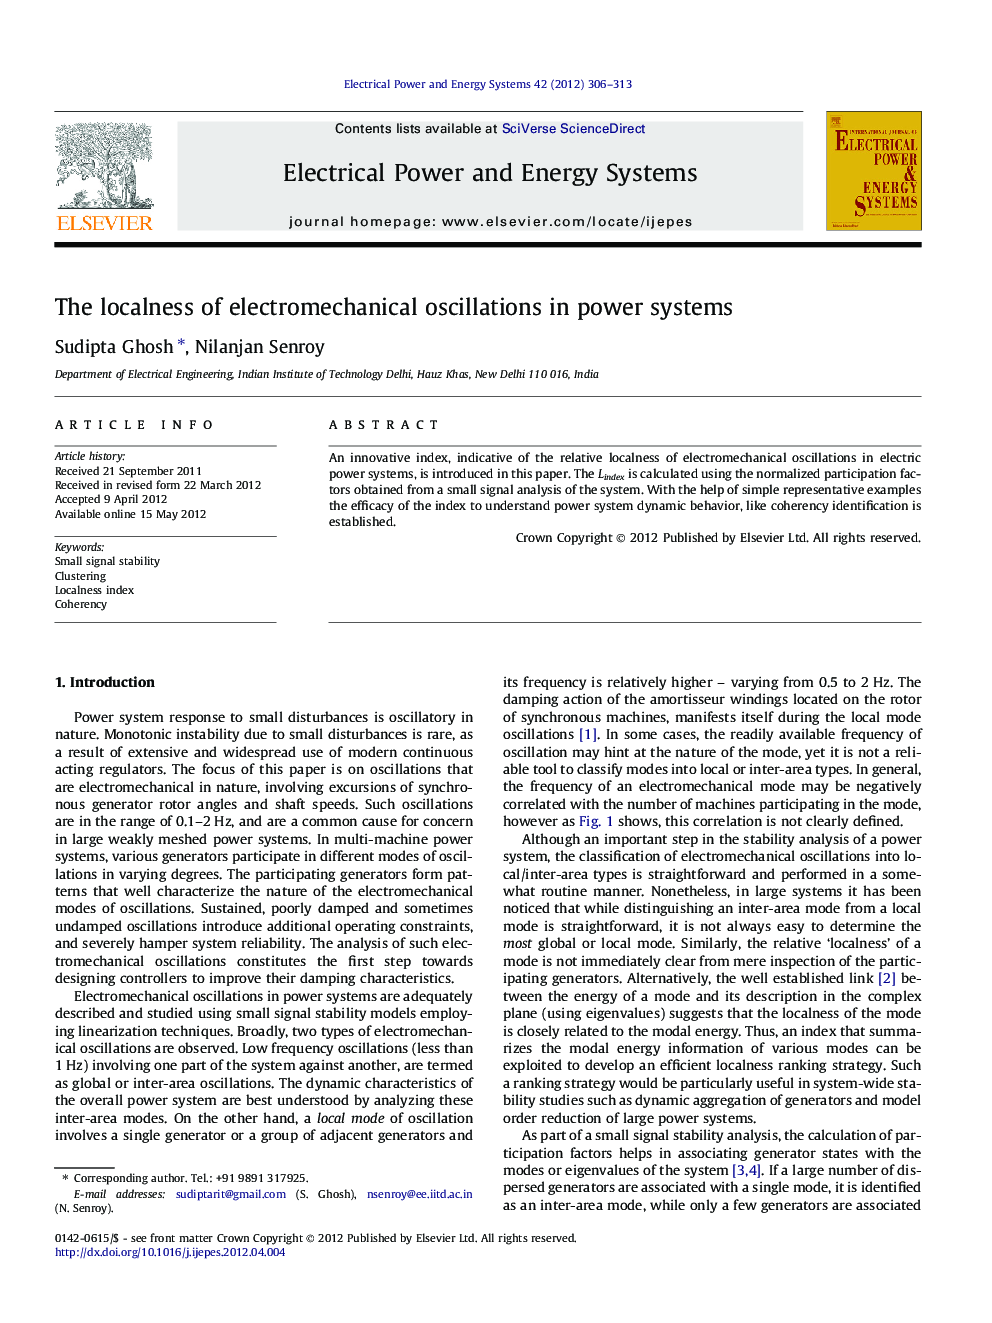 The localness of electromechanical oscillations in power systems